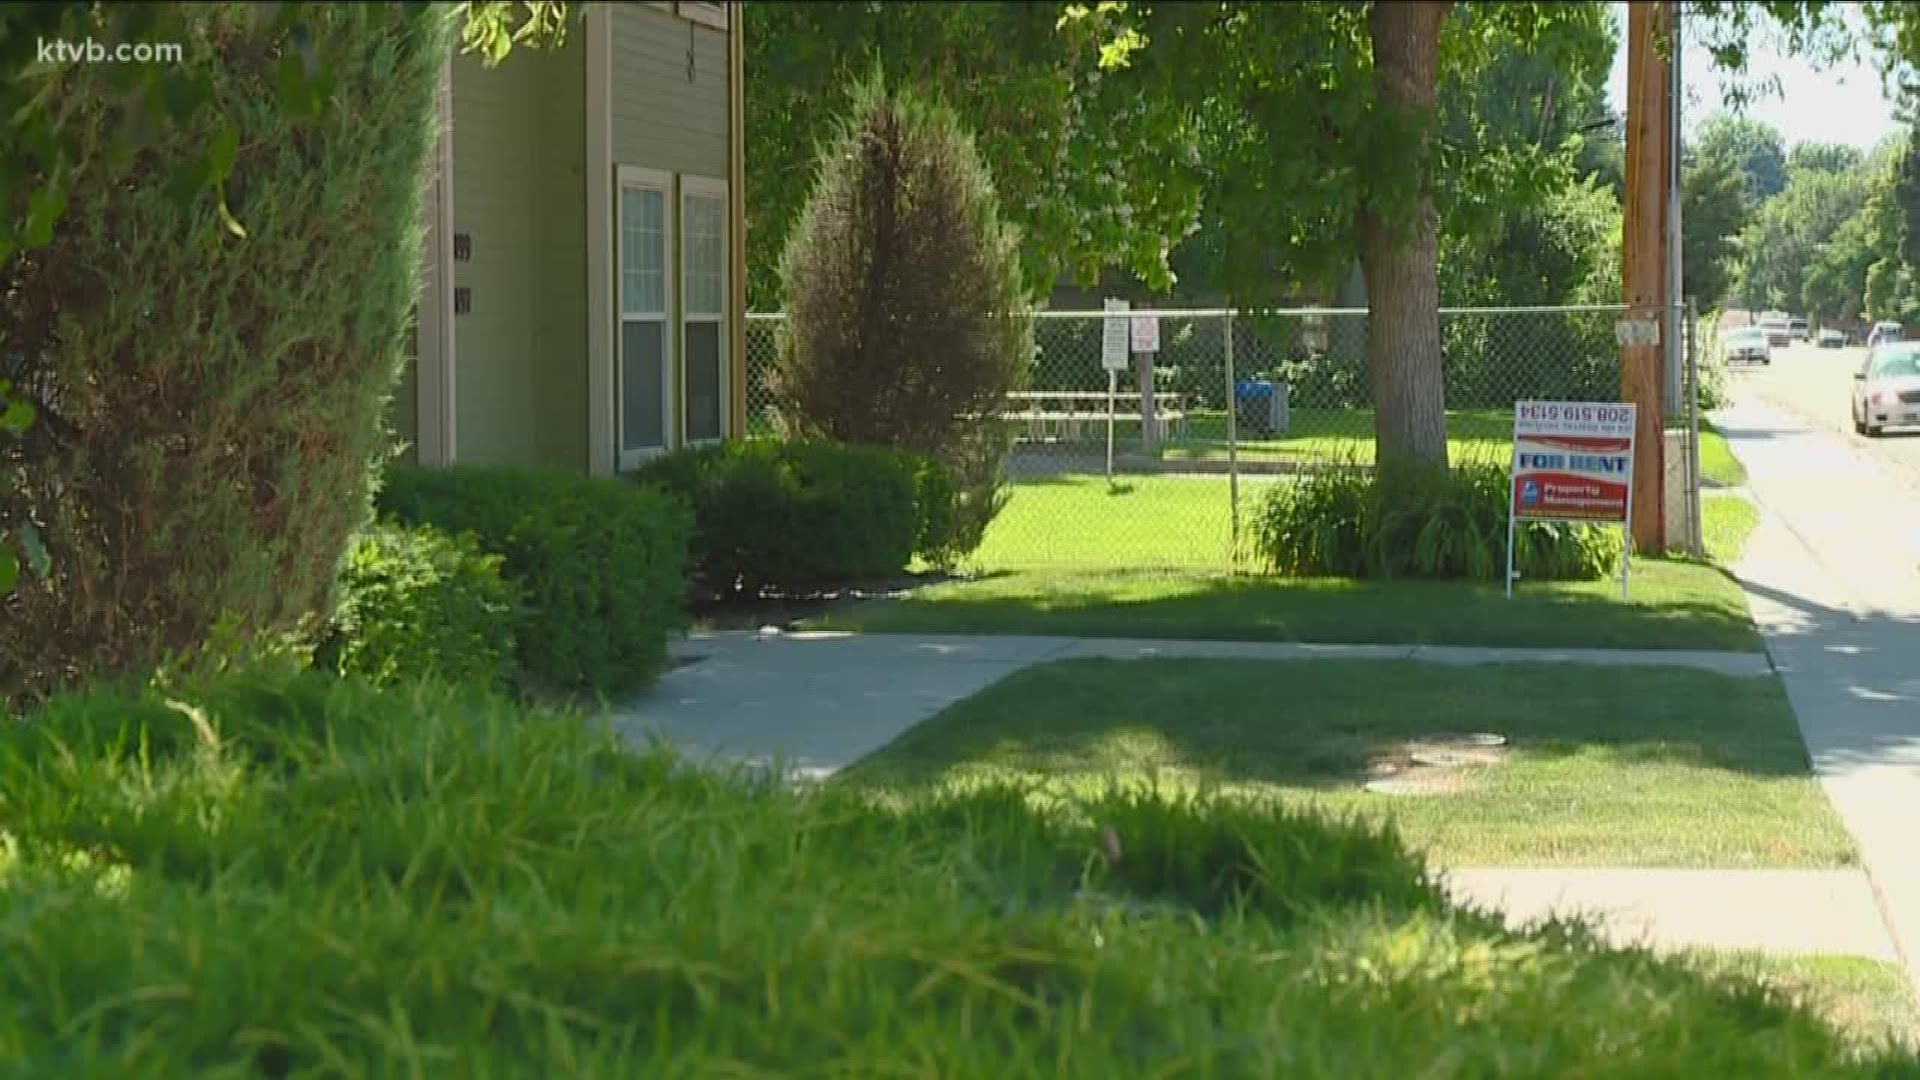 New report shows rent unaffordable in Idaho.